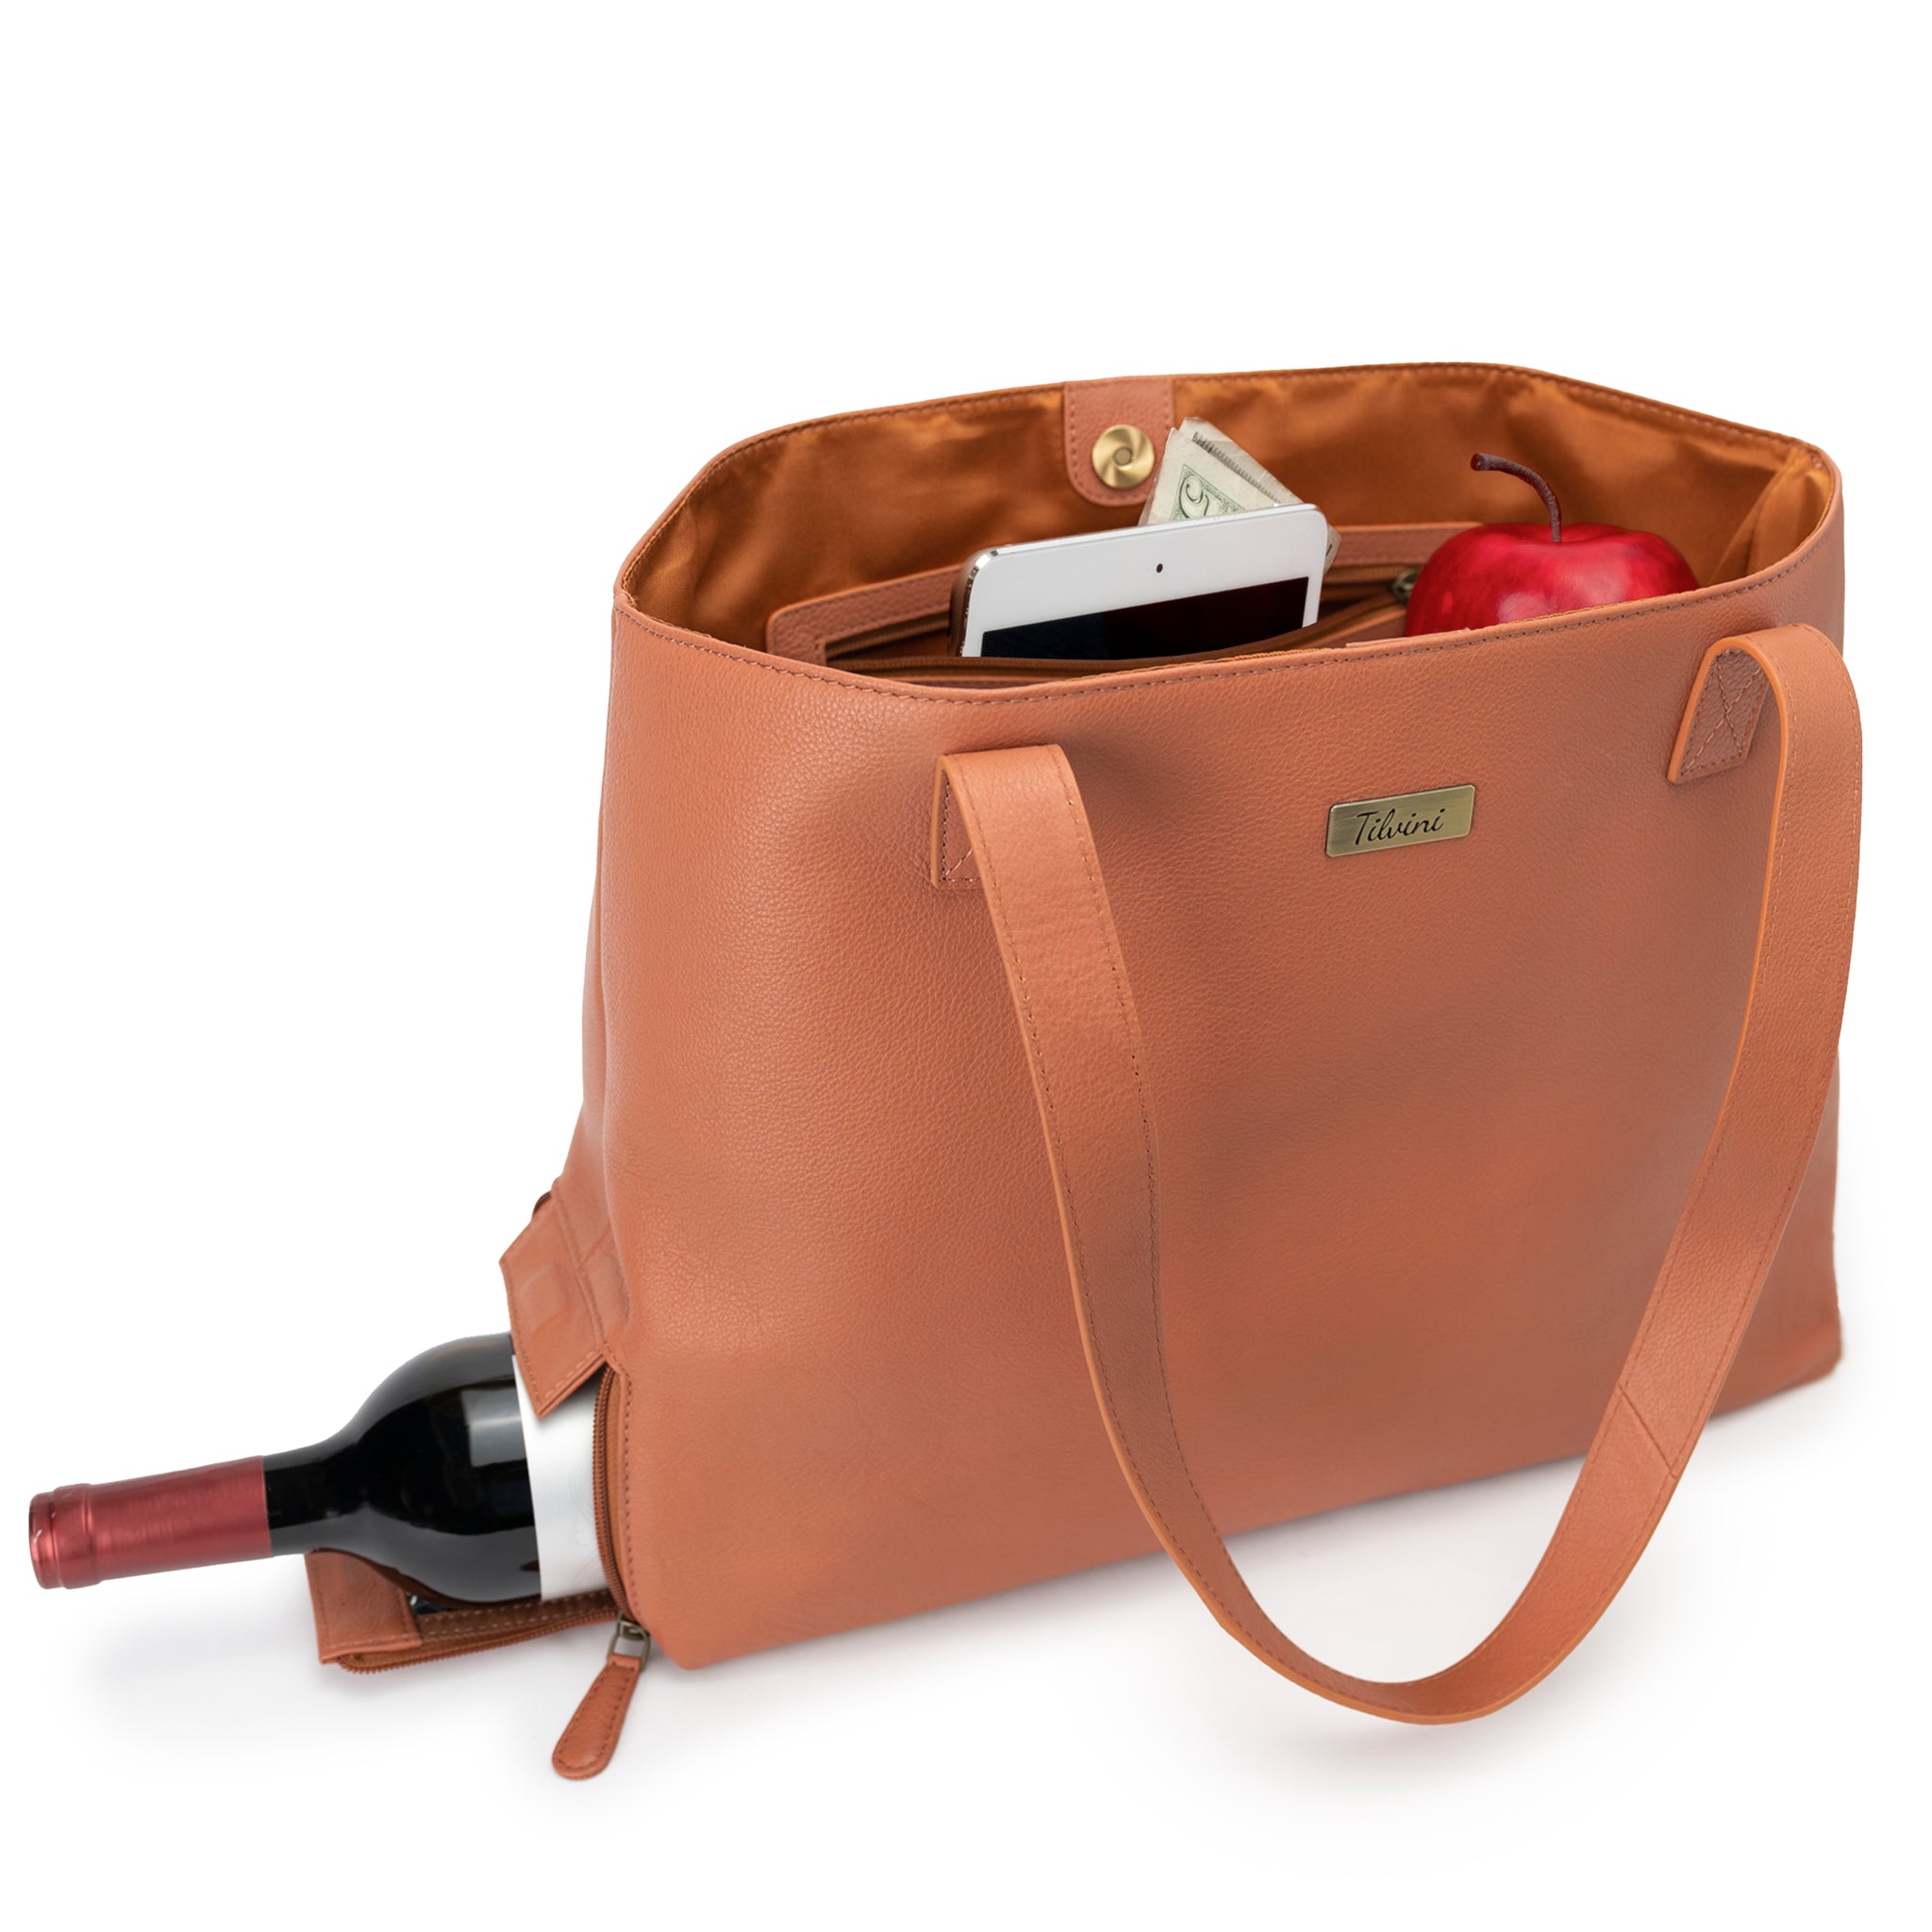 Buy Insulated Wine Bag Water Bottle Carrier Portable Wine Cooler Bag Padded  Protection Tote Bag with Shoulder Strap for Travel Picnic Purse at Amazon.in